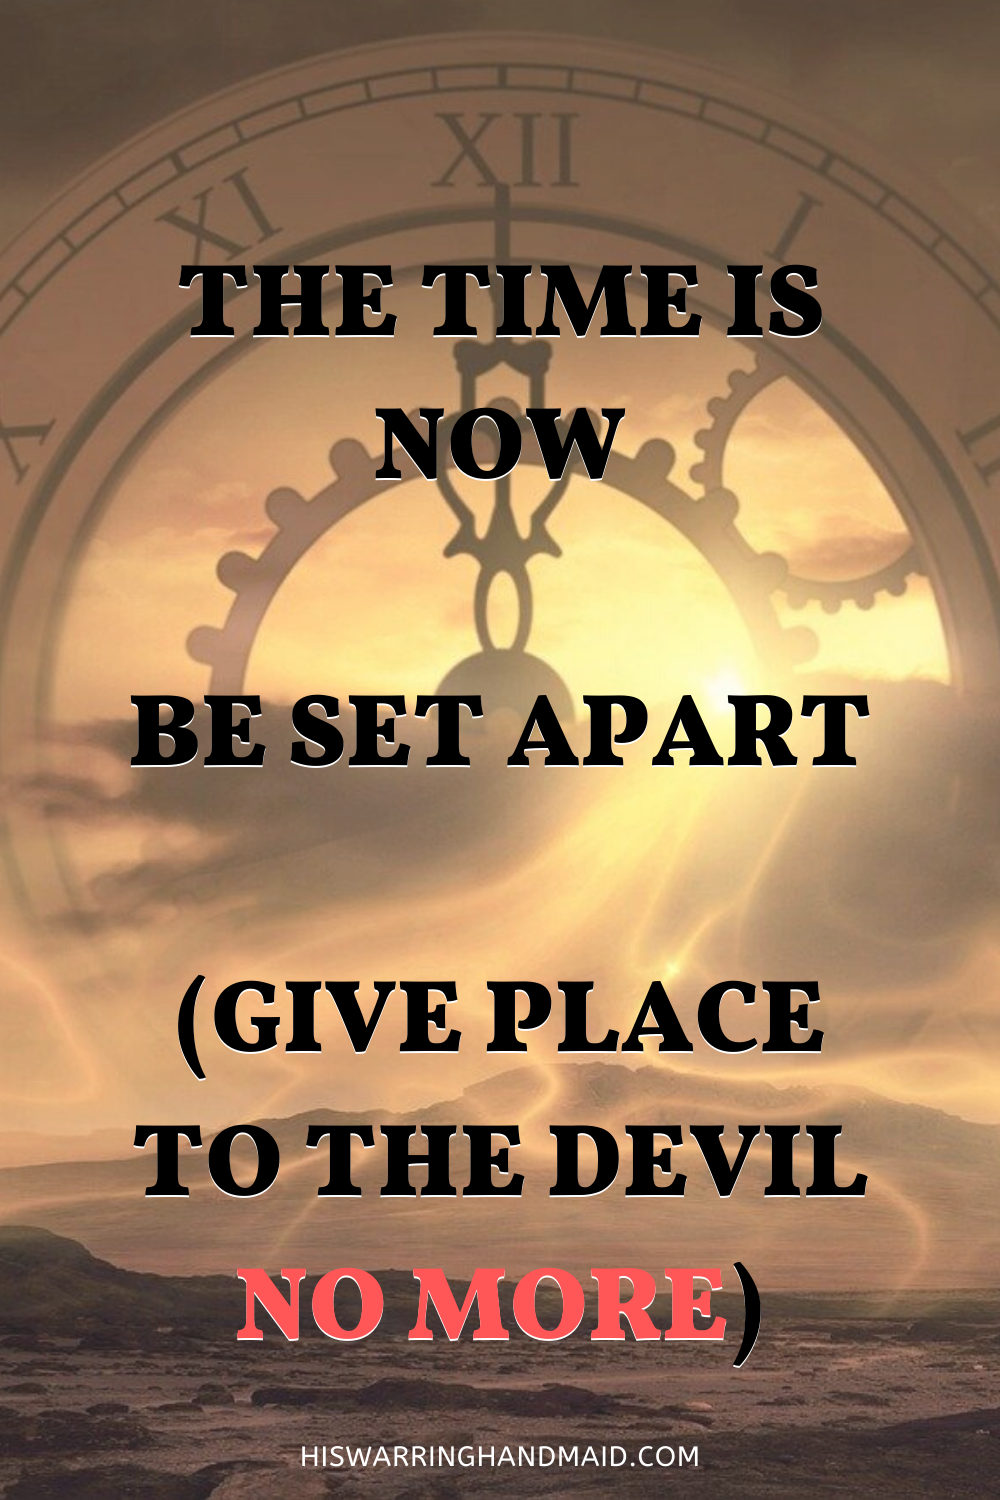 THE TIME IS NOW. BE SET APART